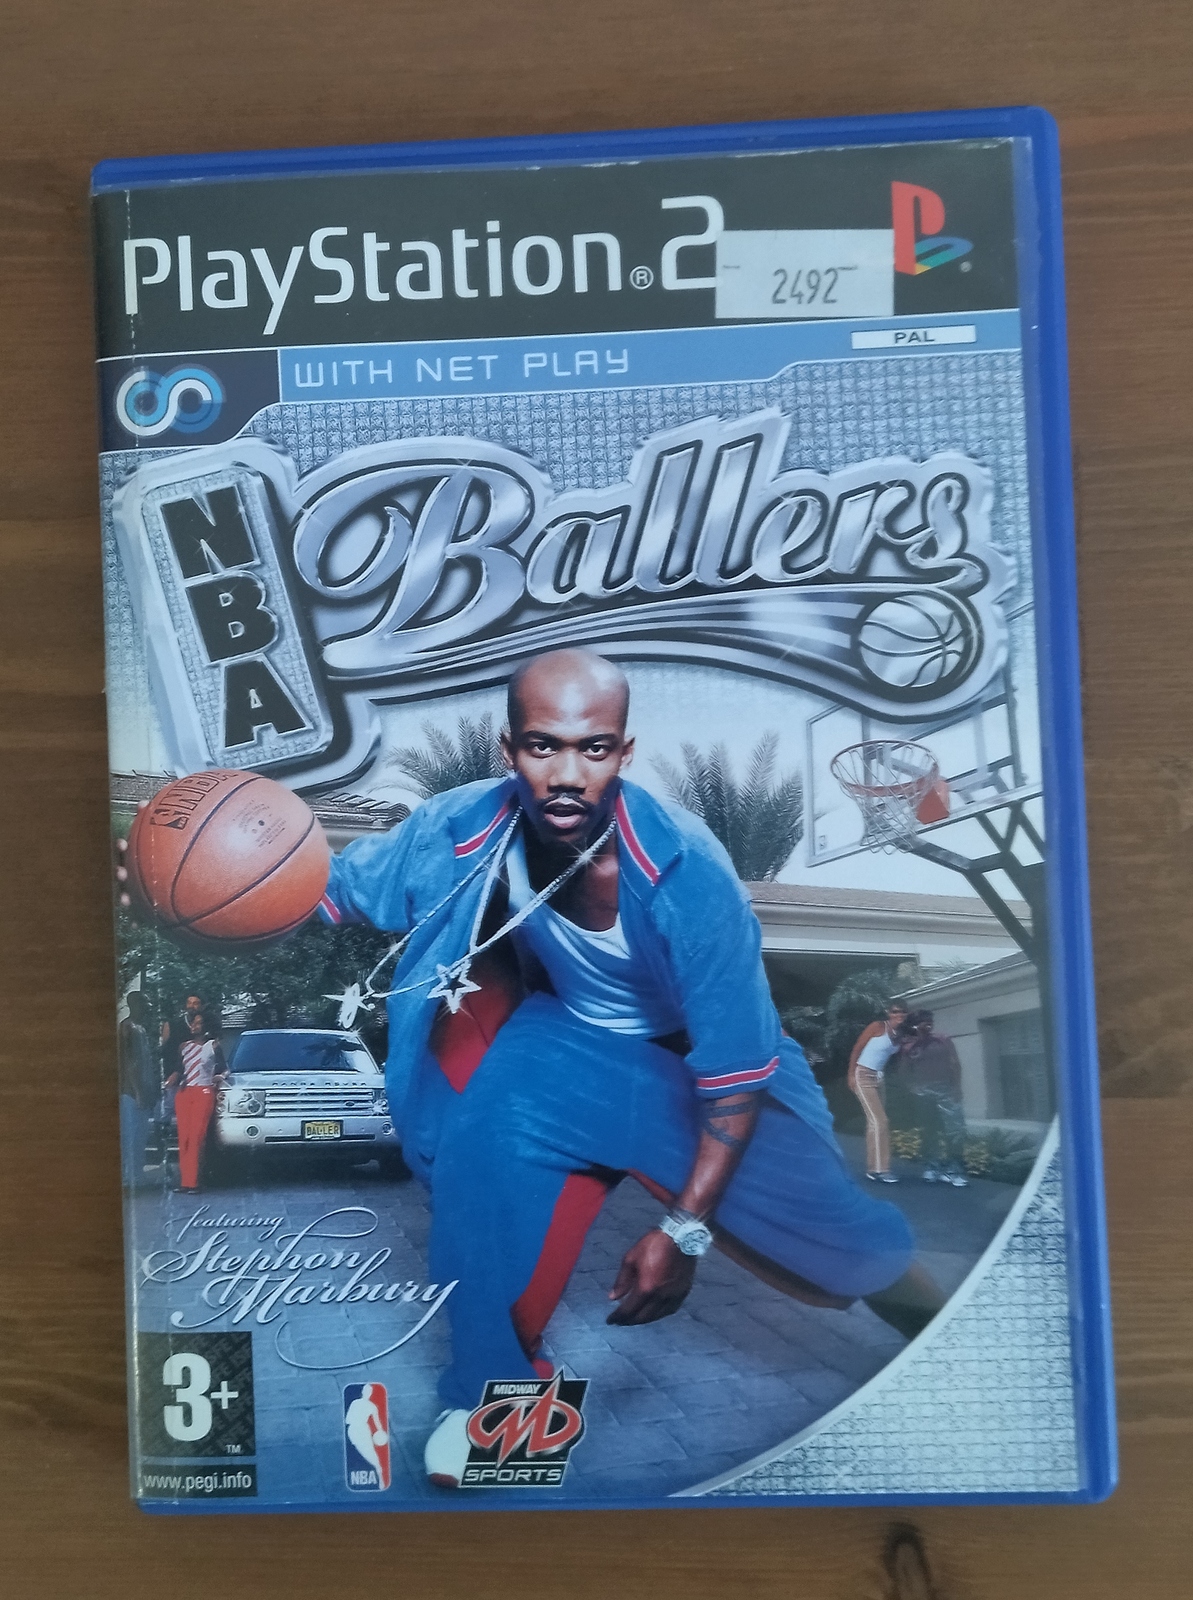 Primary image for NBA Ballers (PS2)